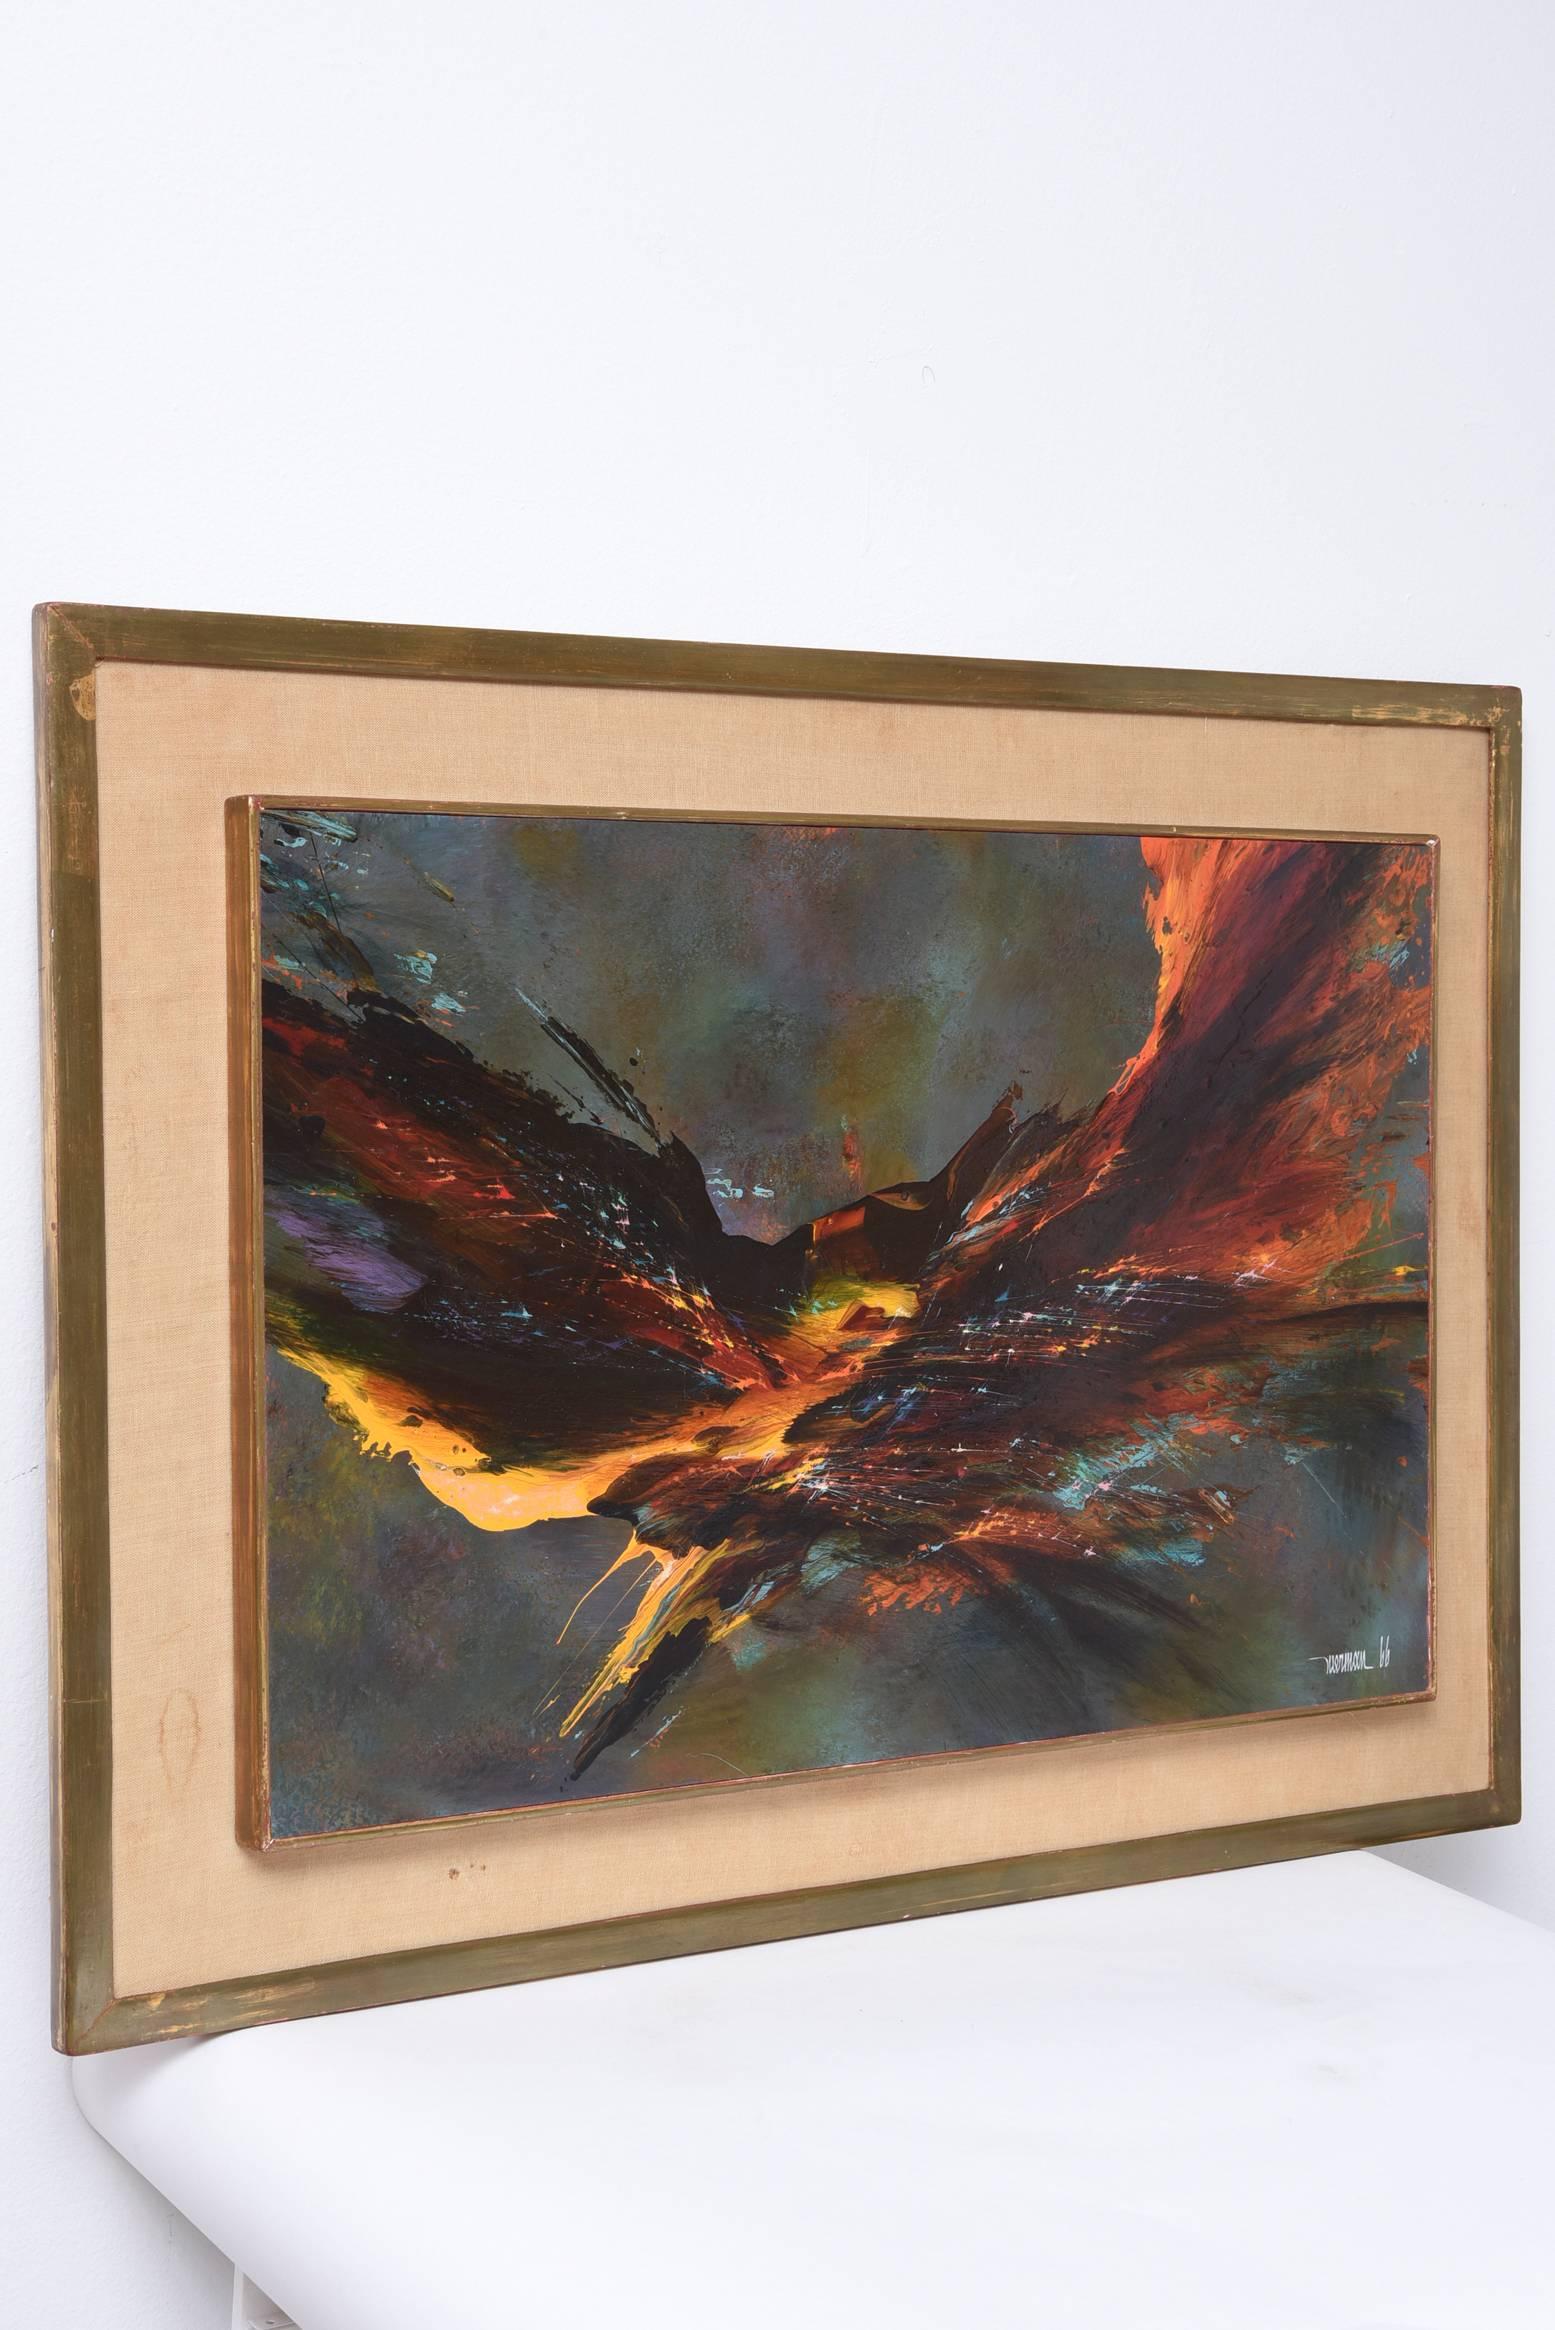 Intense acrylic on masonite painting Titled Bird Fury by Leonardo Nierman signed and dated in the lower right Nierman 66.

According to Art Brokerage:
Leonardo Nierman Mexican Artist: b. 1932. Leonardo Nierman's paintings vibrantly come to life